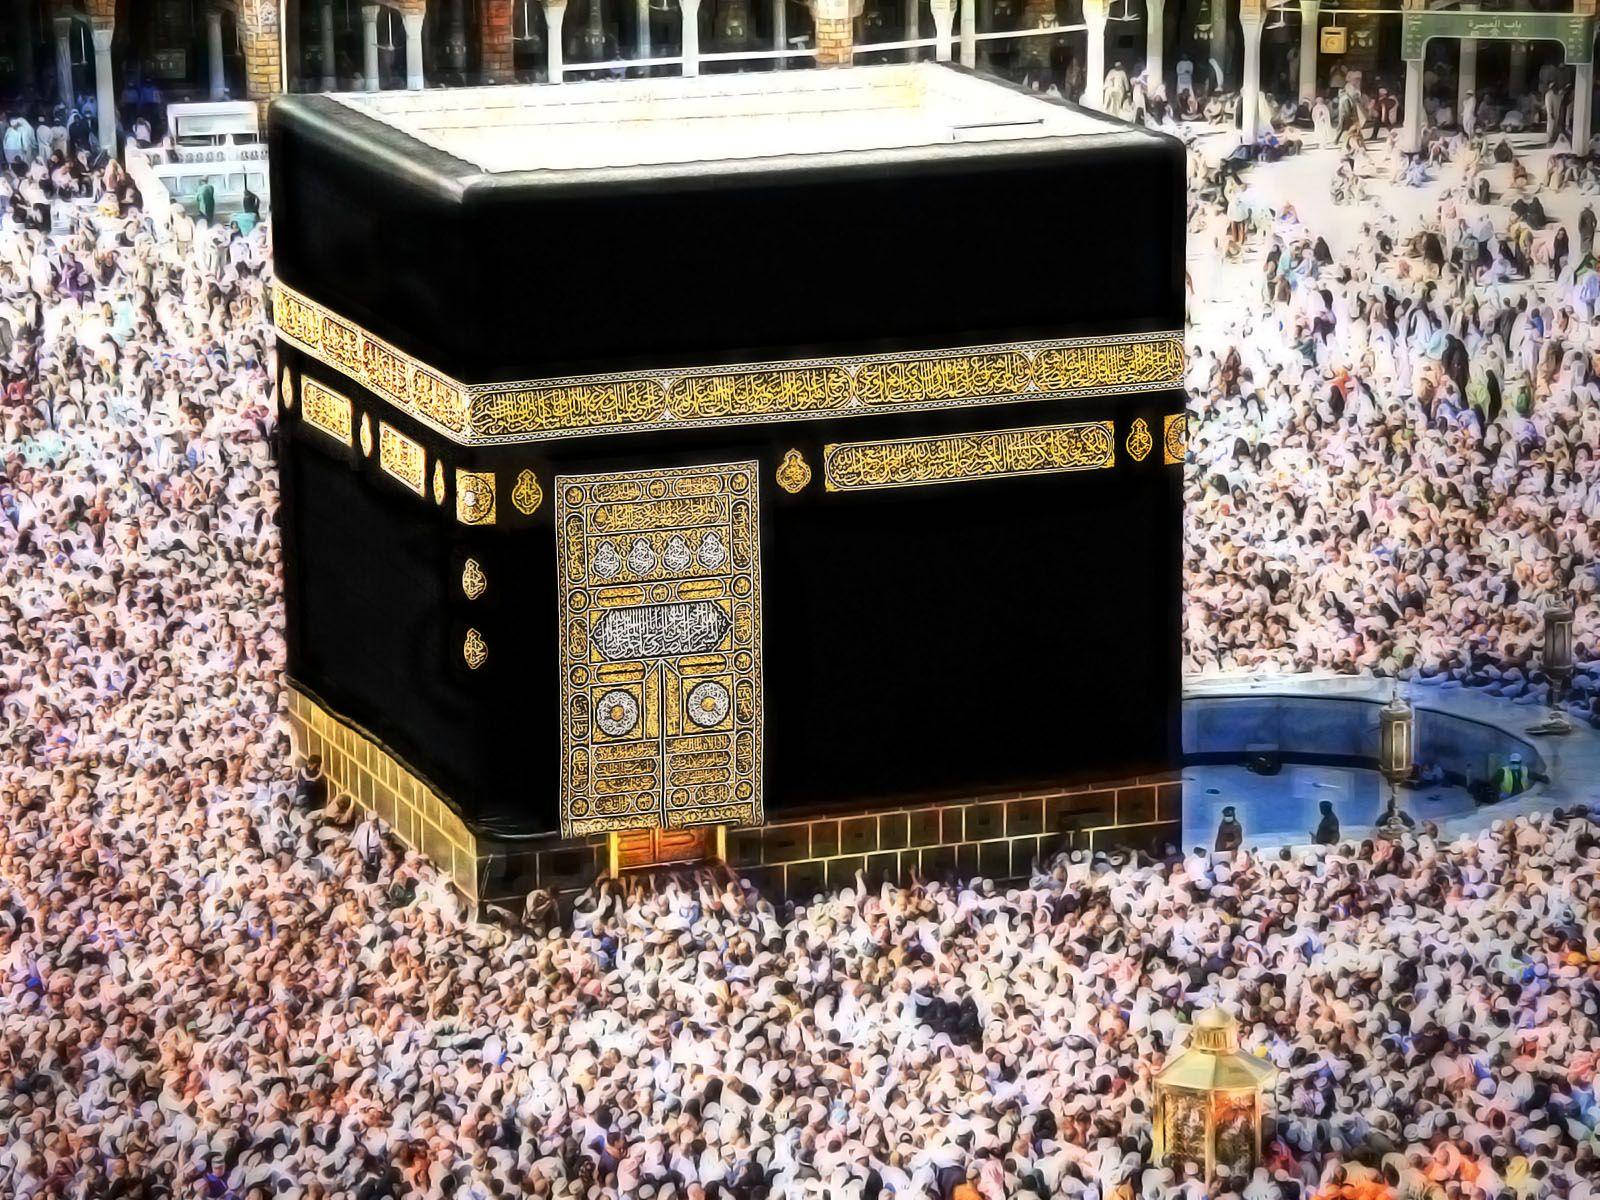 Stunning High Resolution Image of the Kaaba, the Black Stone Worship Place in Makkah Wallpaper